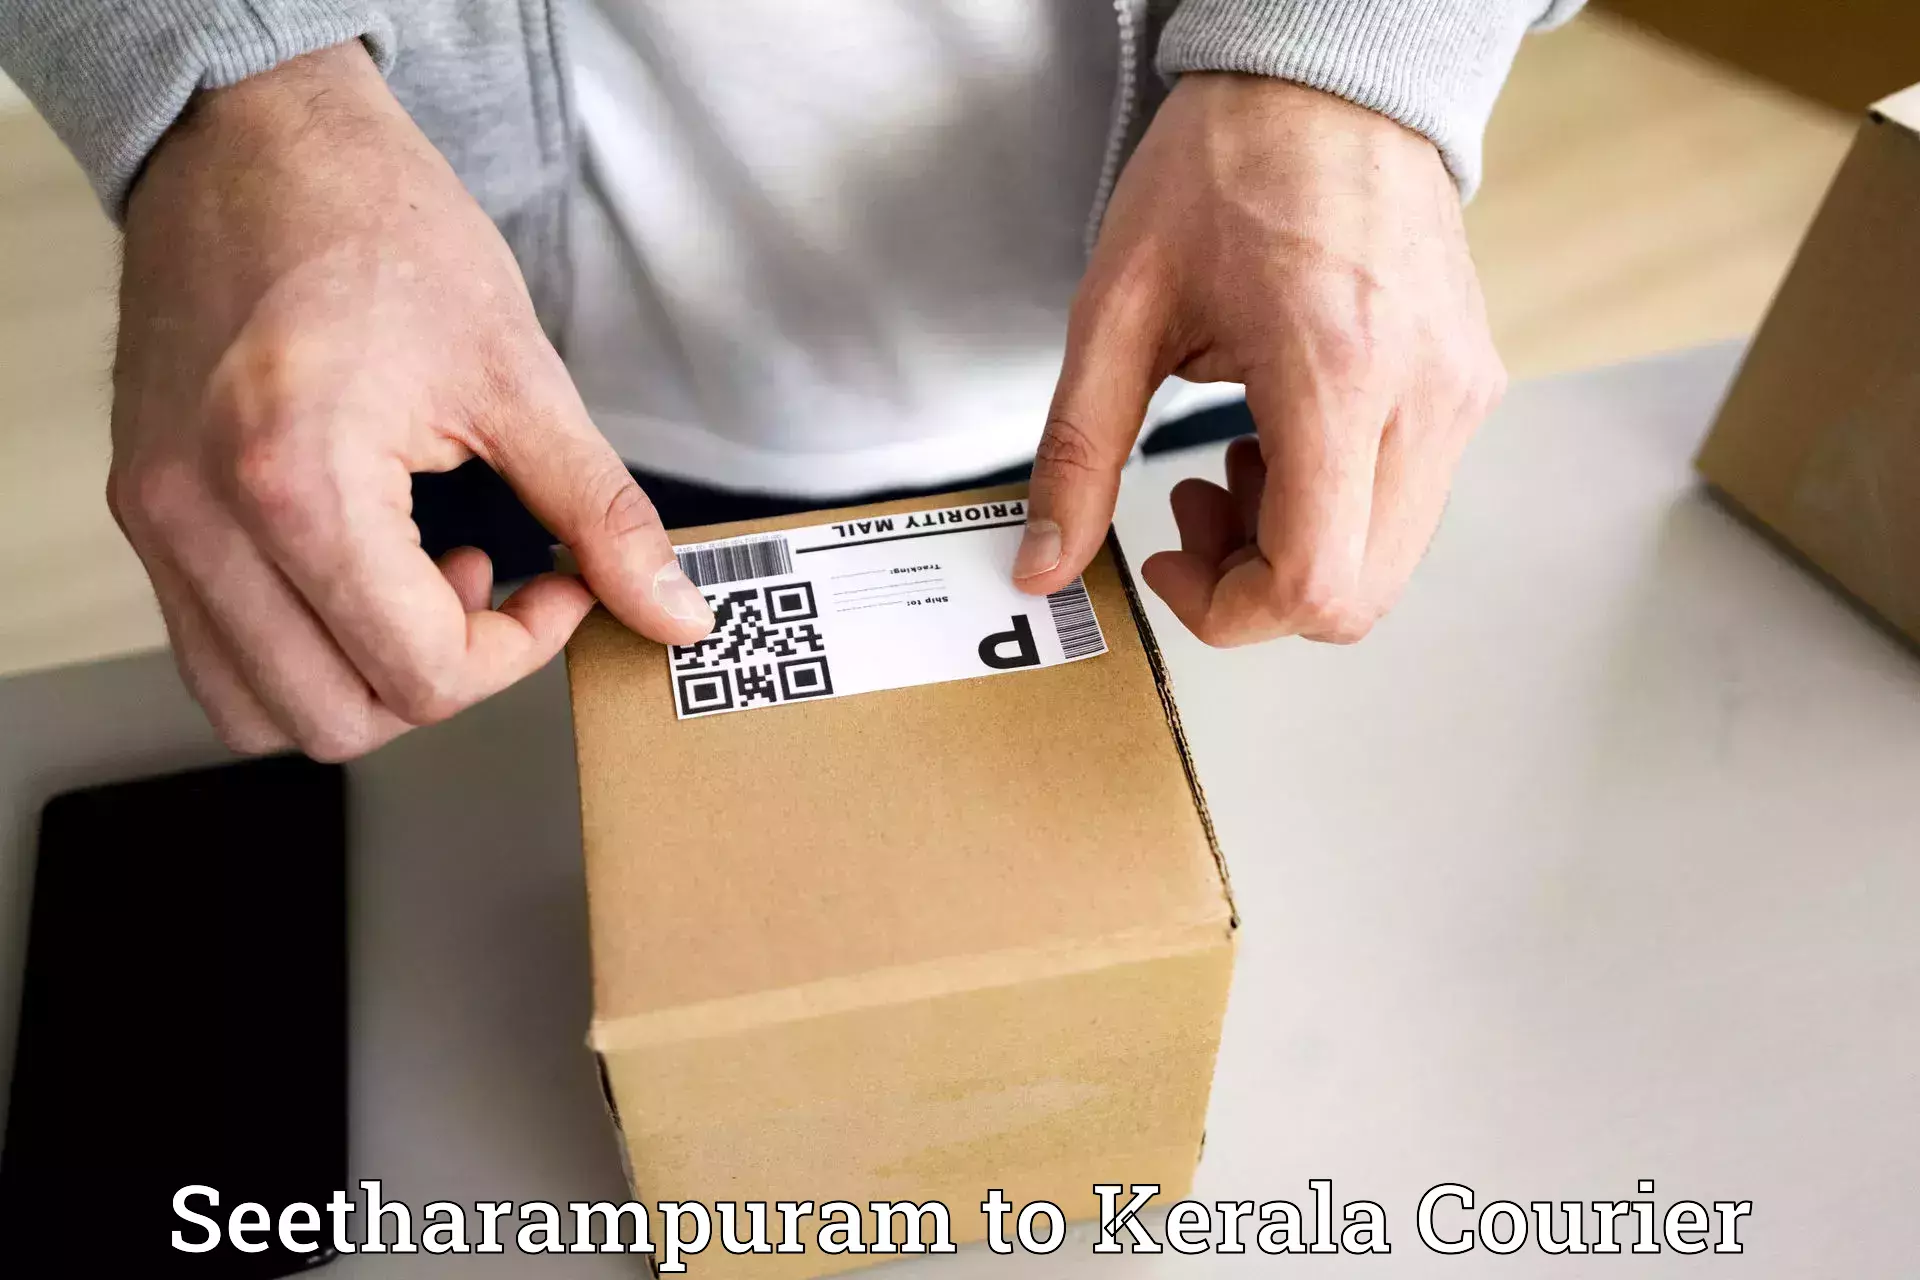 Residential courier service Seetharampuram to Cochin University of Science and Technology